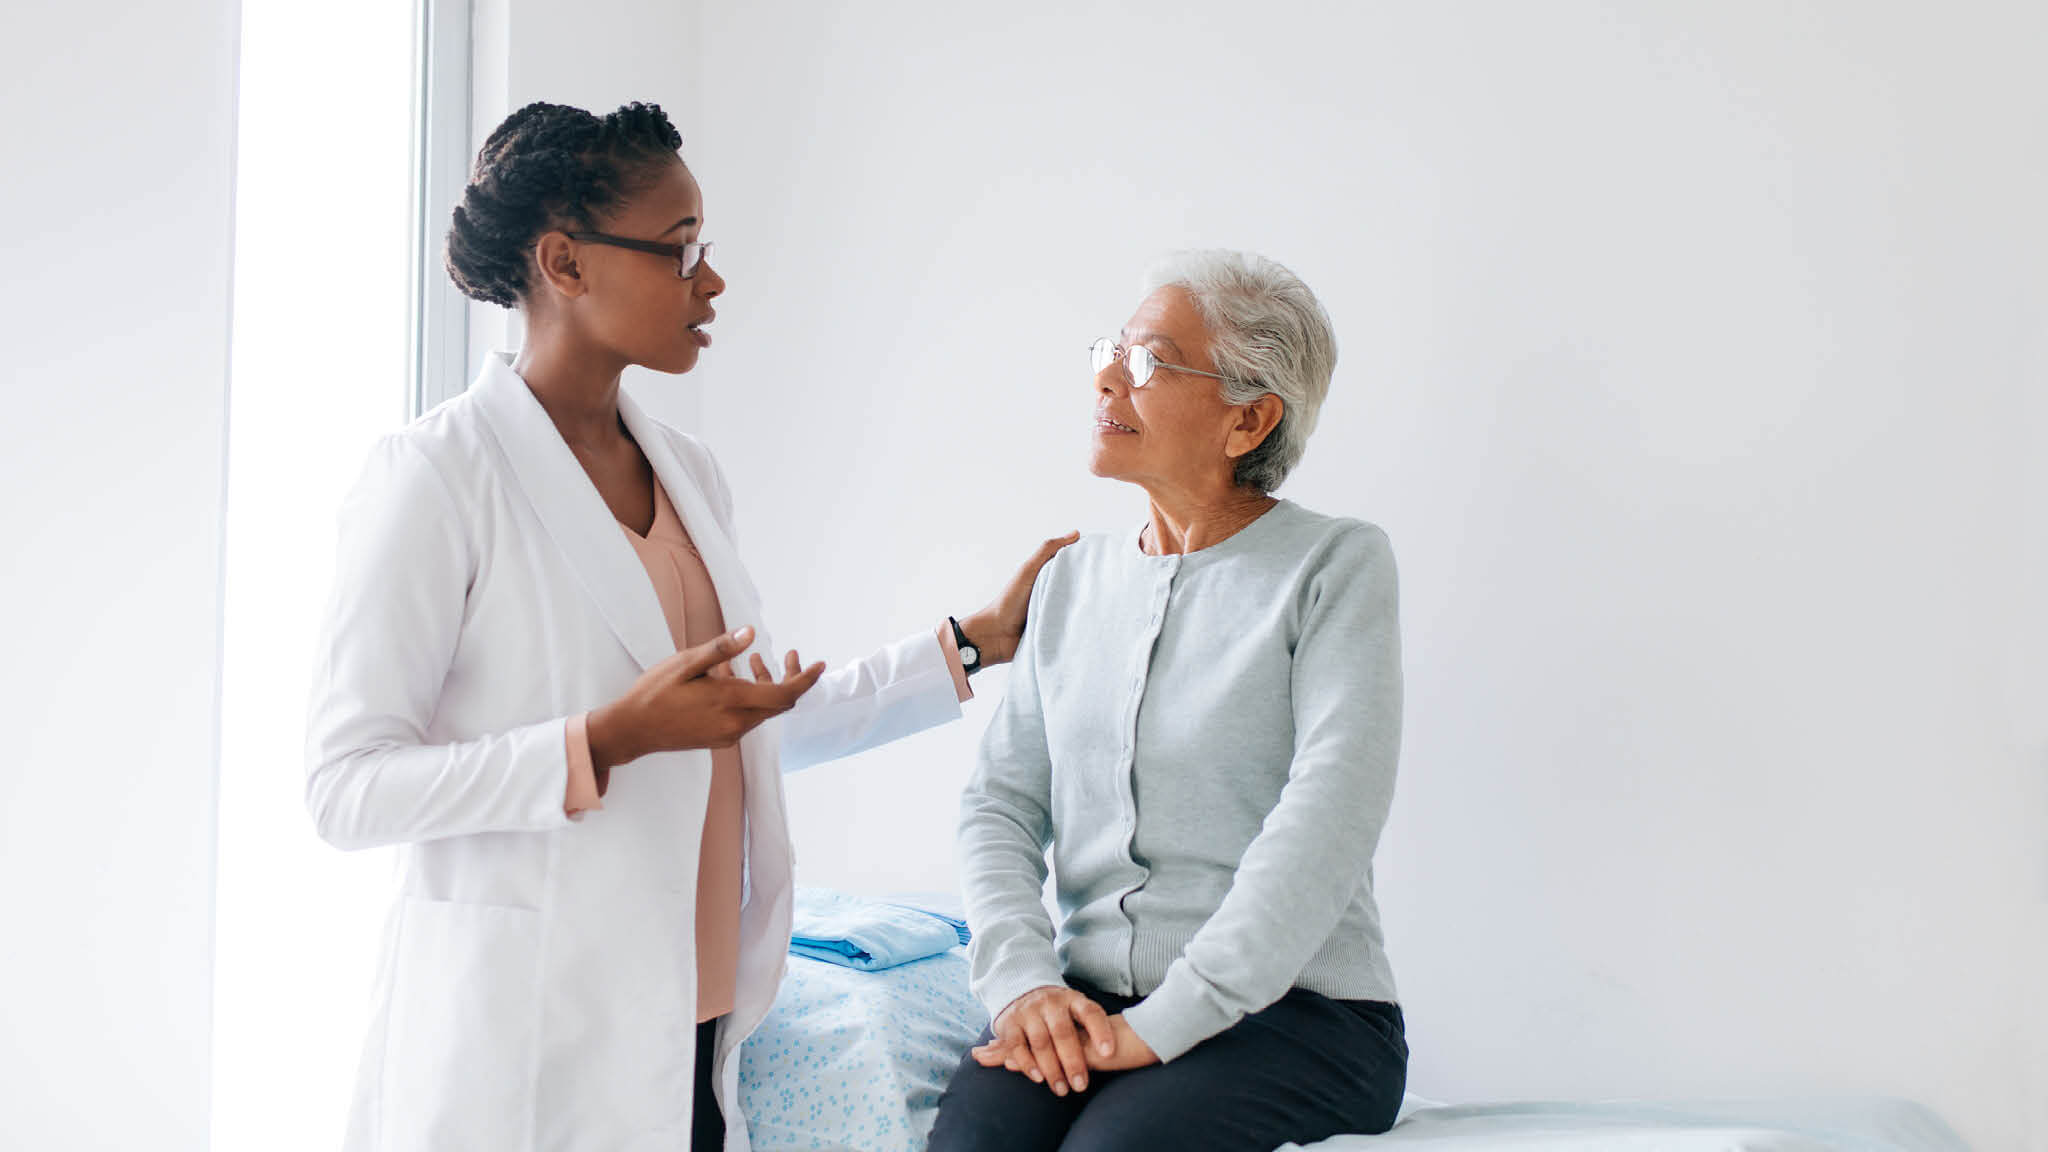 A doctor is having a conversation with a patient